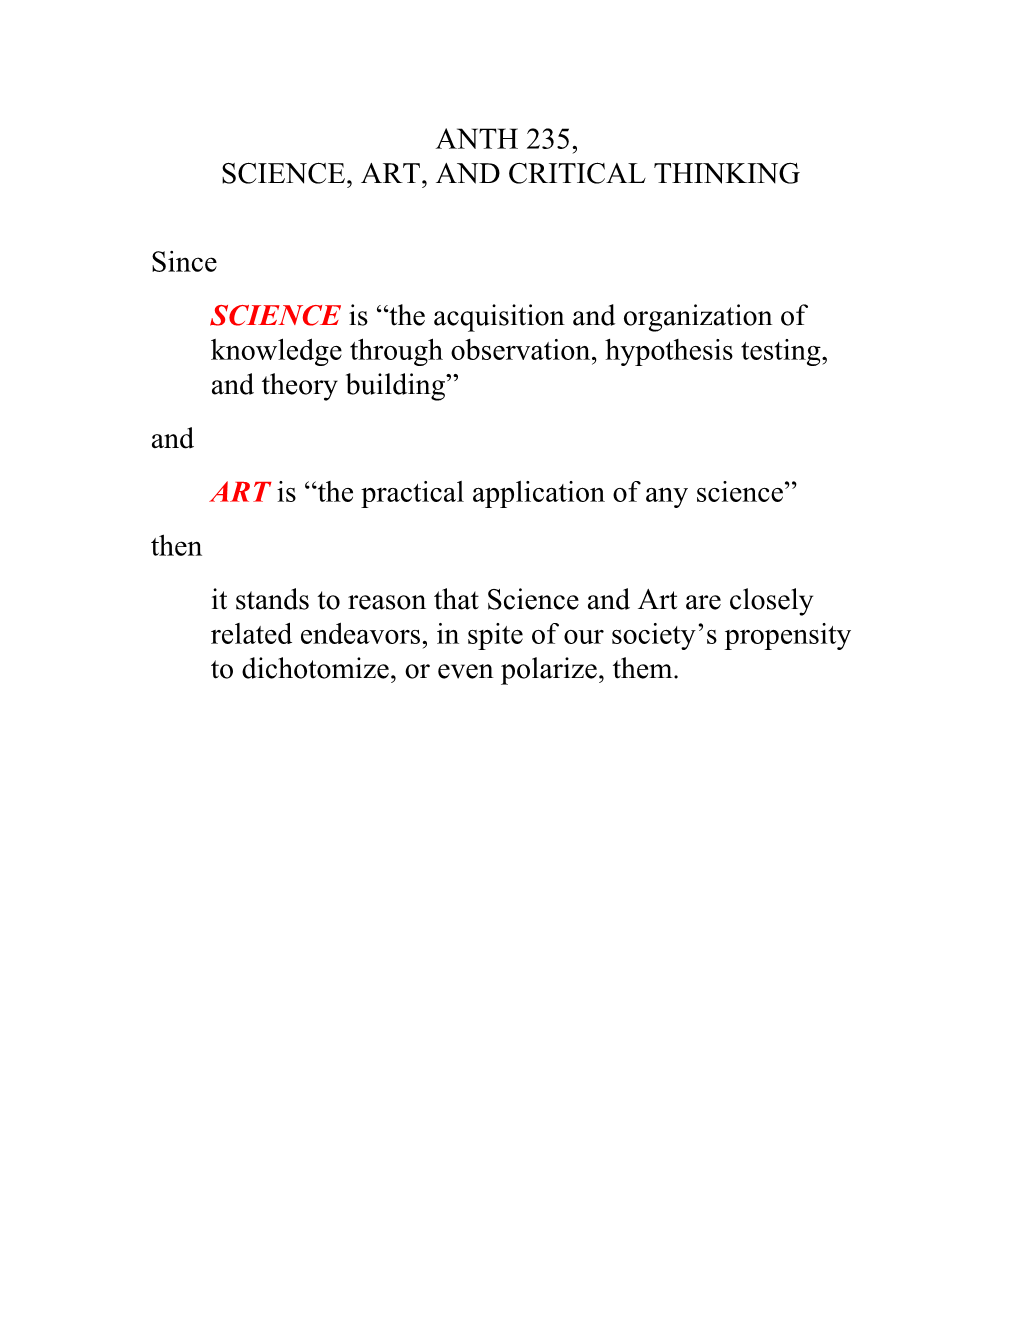 Anth 235, Science and Critical Thinking